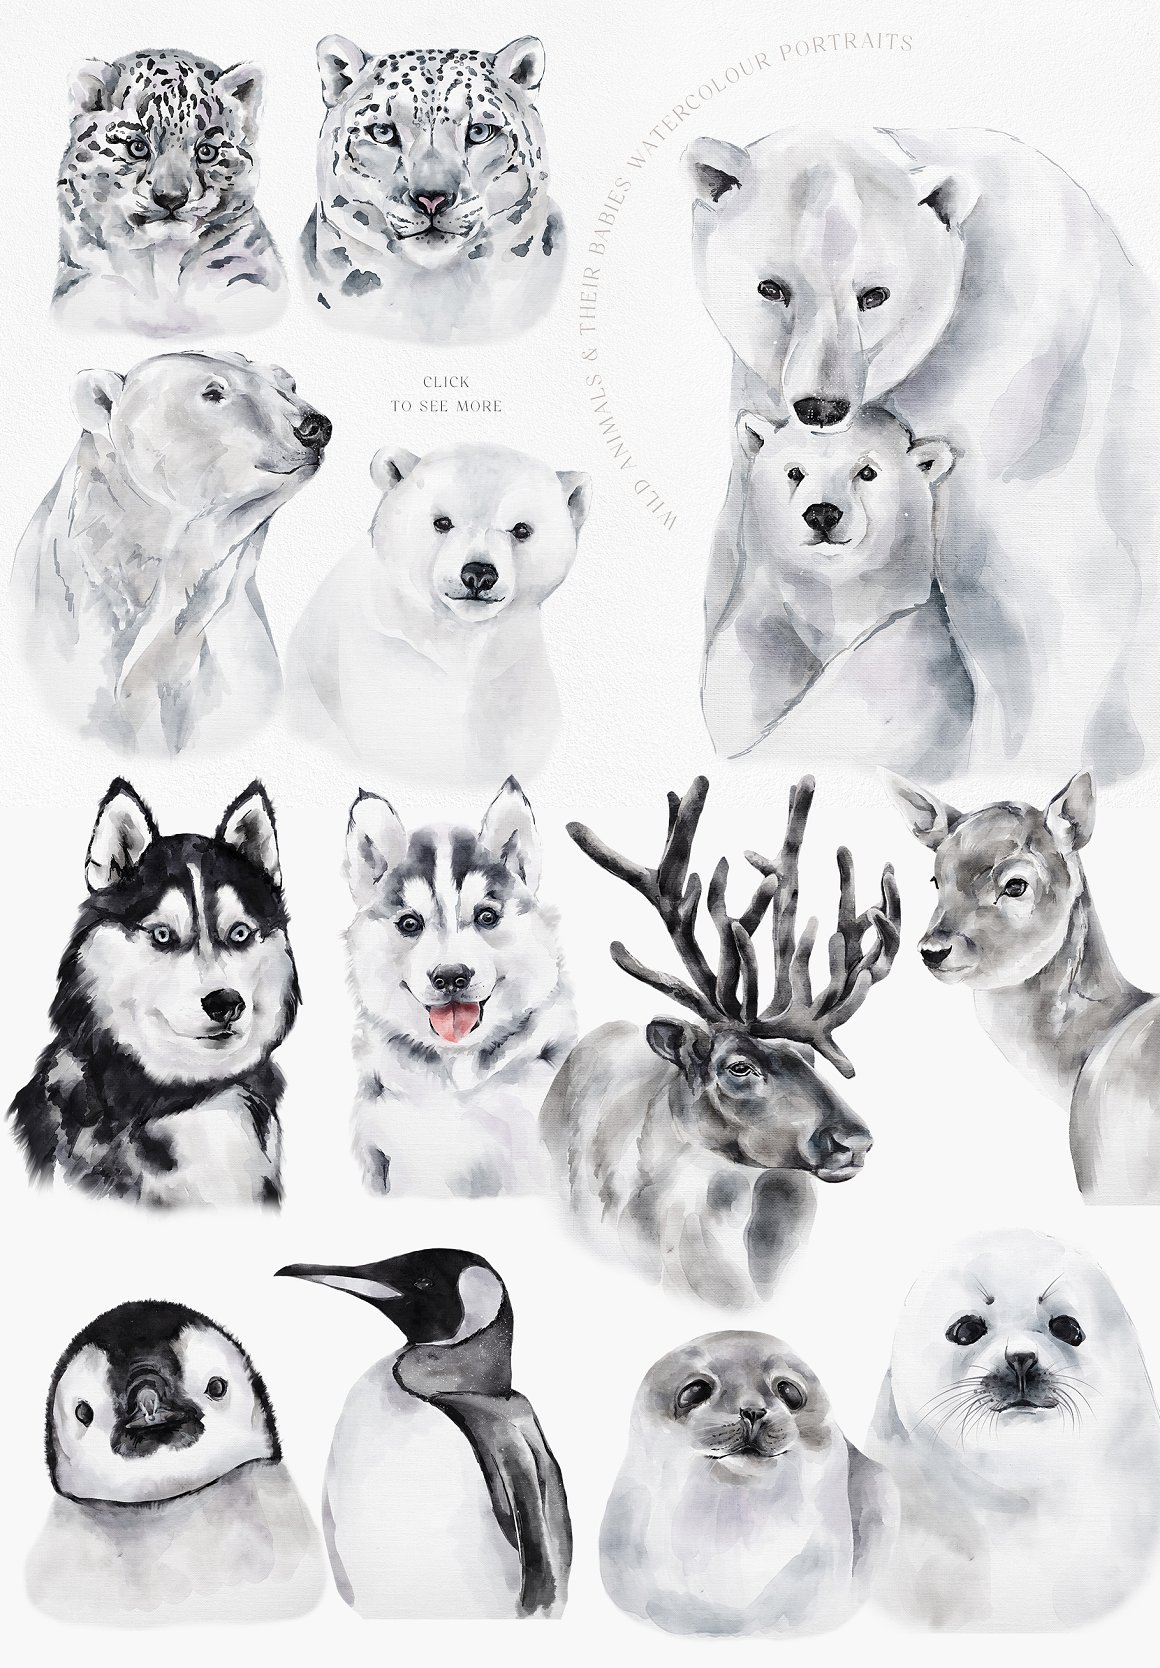 A set of different watercolor illustrations of winter animals on a gray abckground.